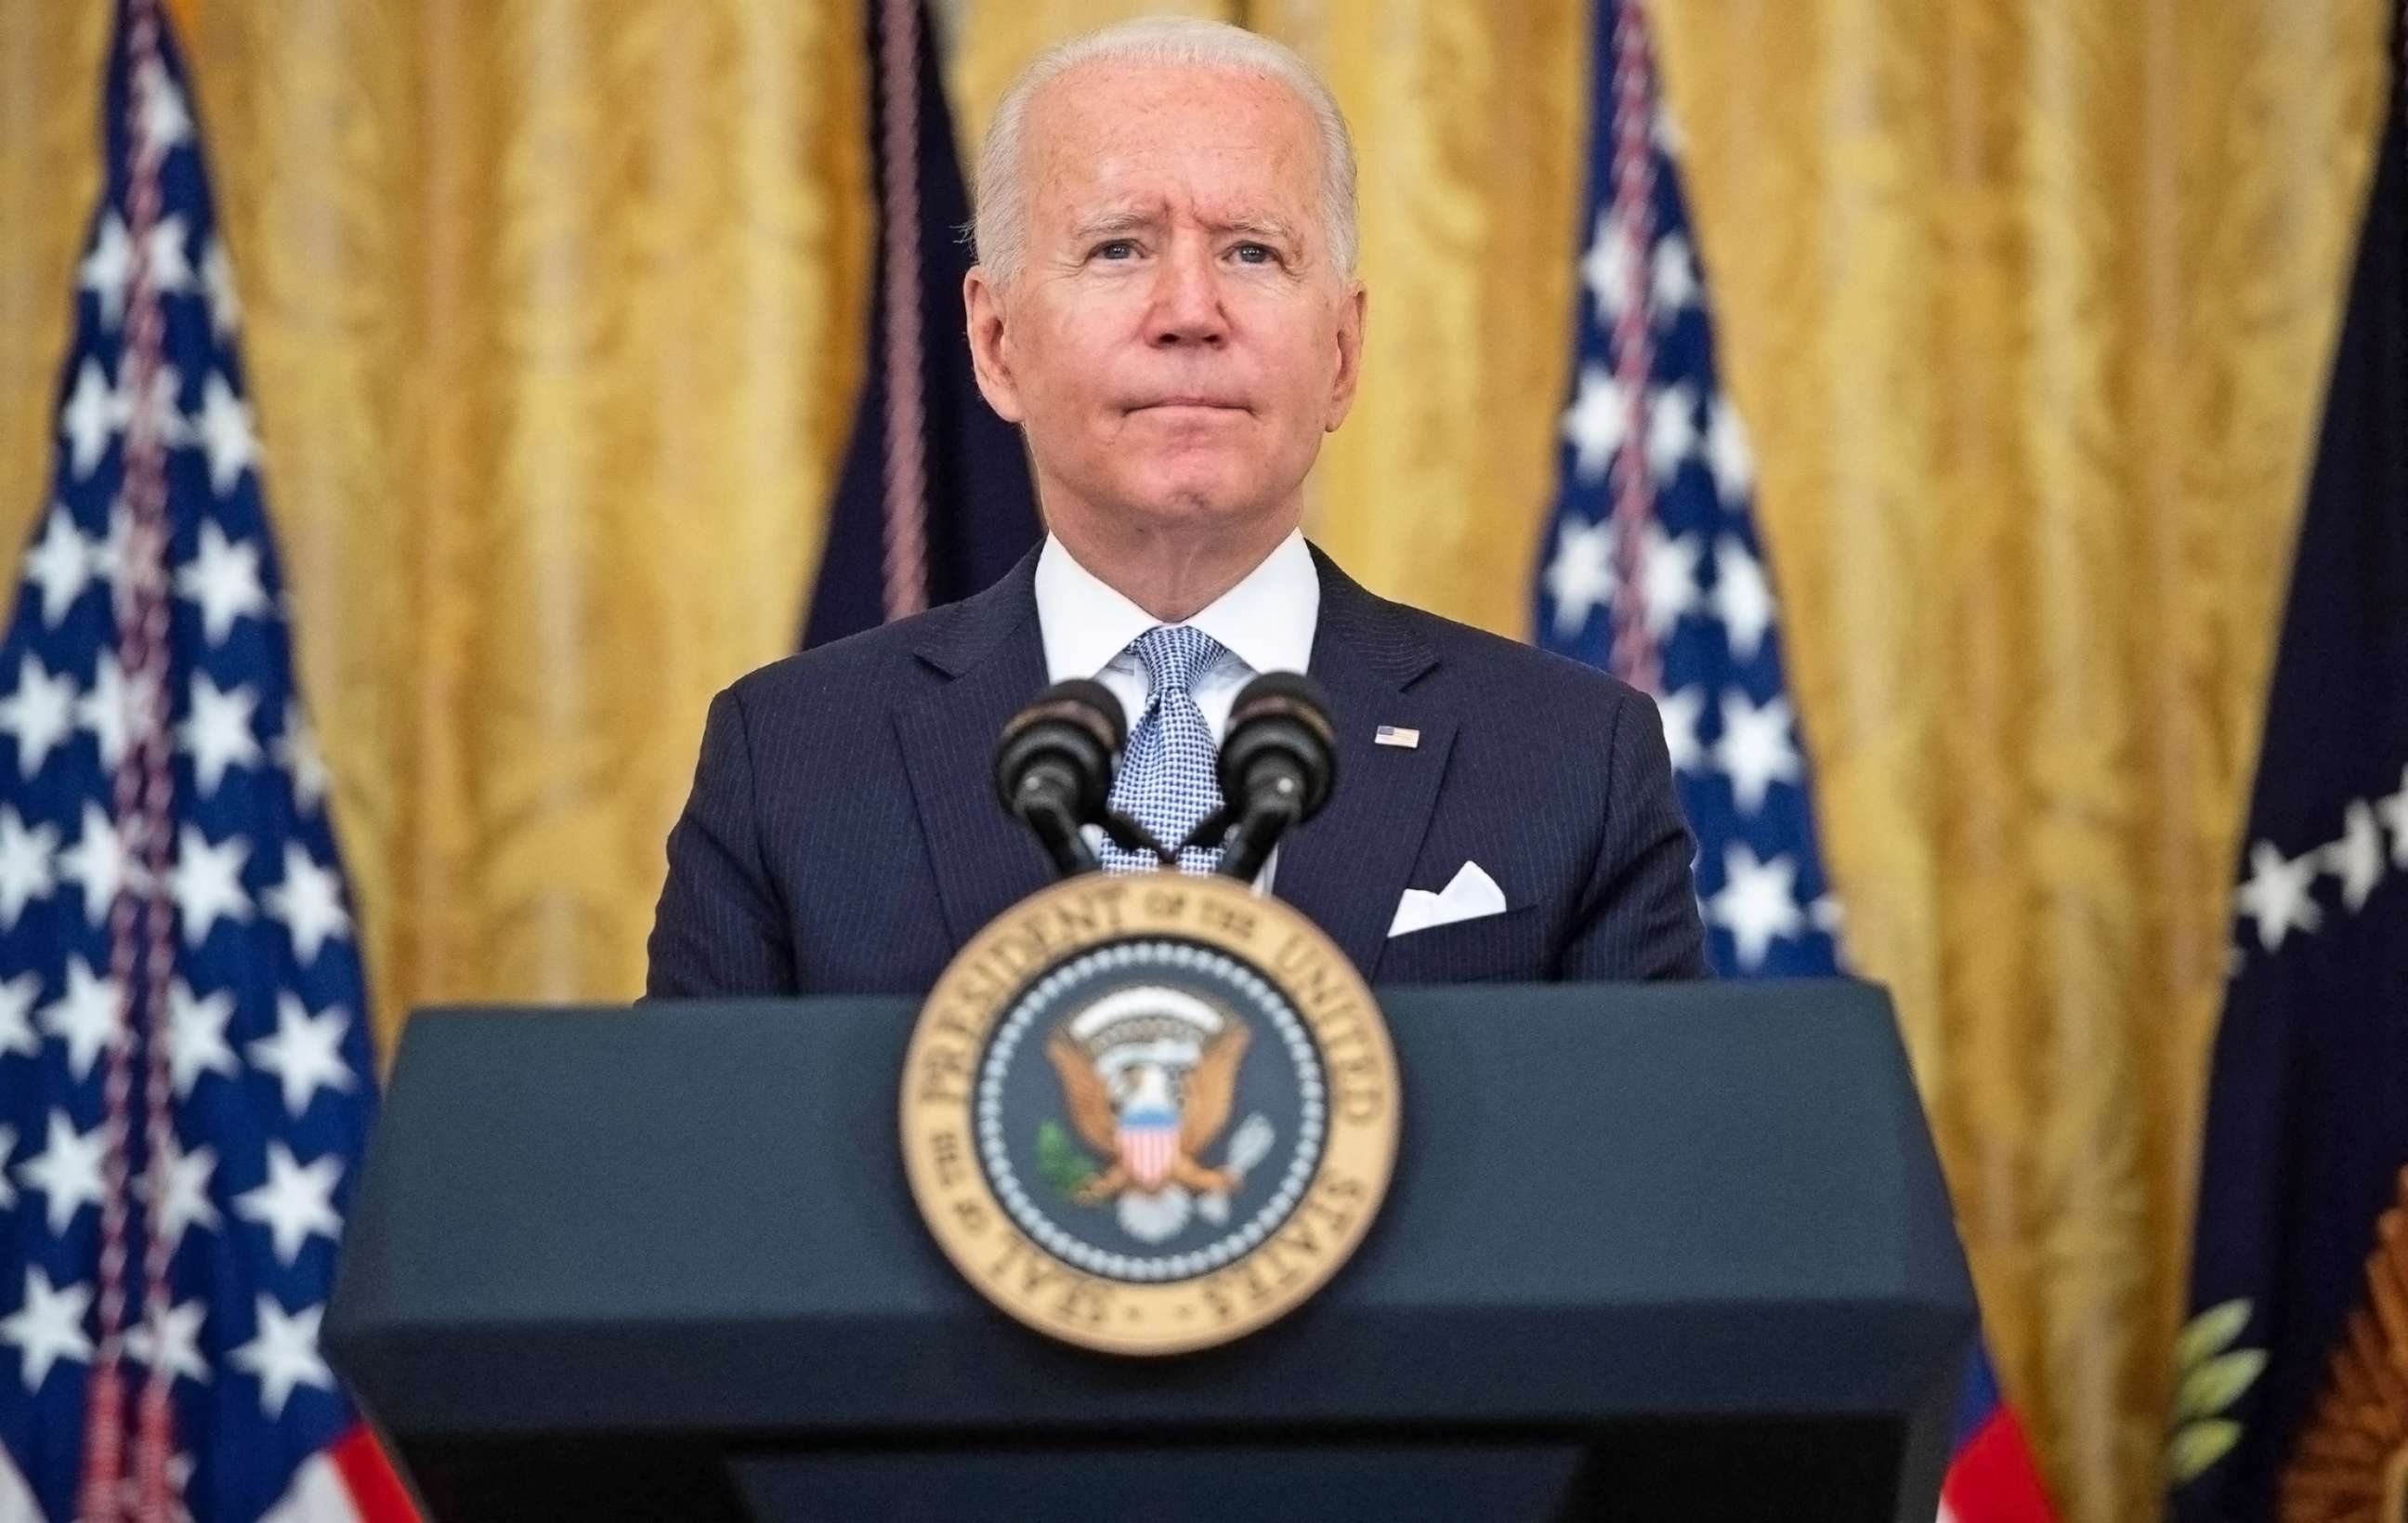 PHOTO: President Joe Biden speaks about COVID-19 vaccinations, in the East Room of the White House in Washington, D.C, July 29, 2021.